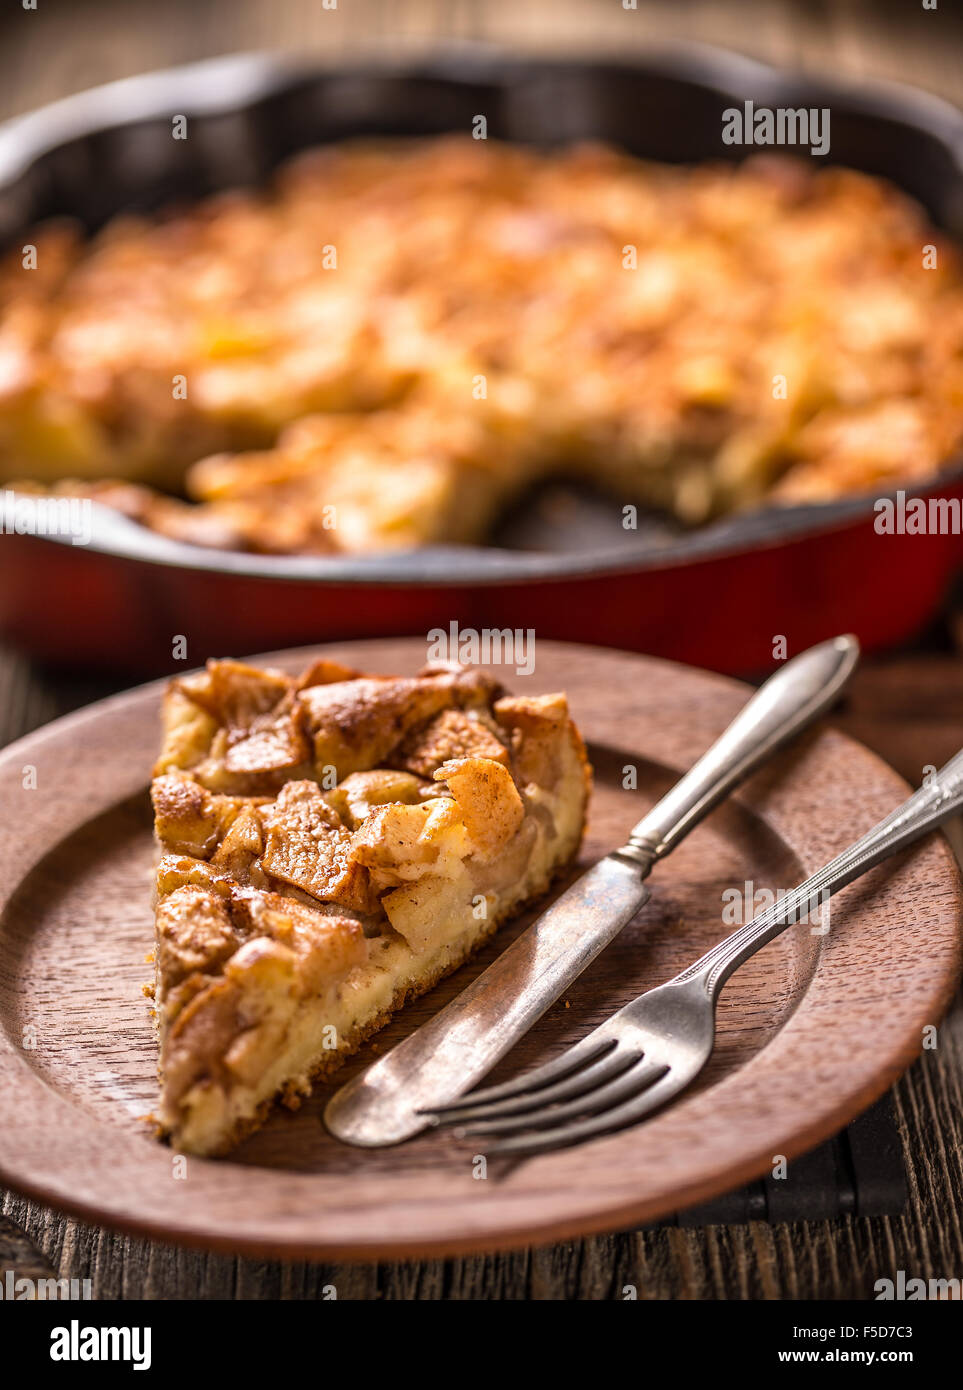 Removing slice of apple pie, top view Stock Photo